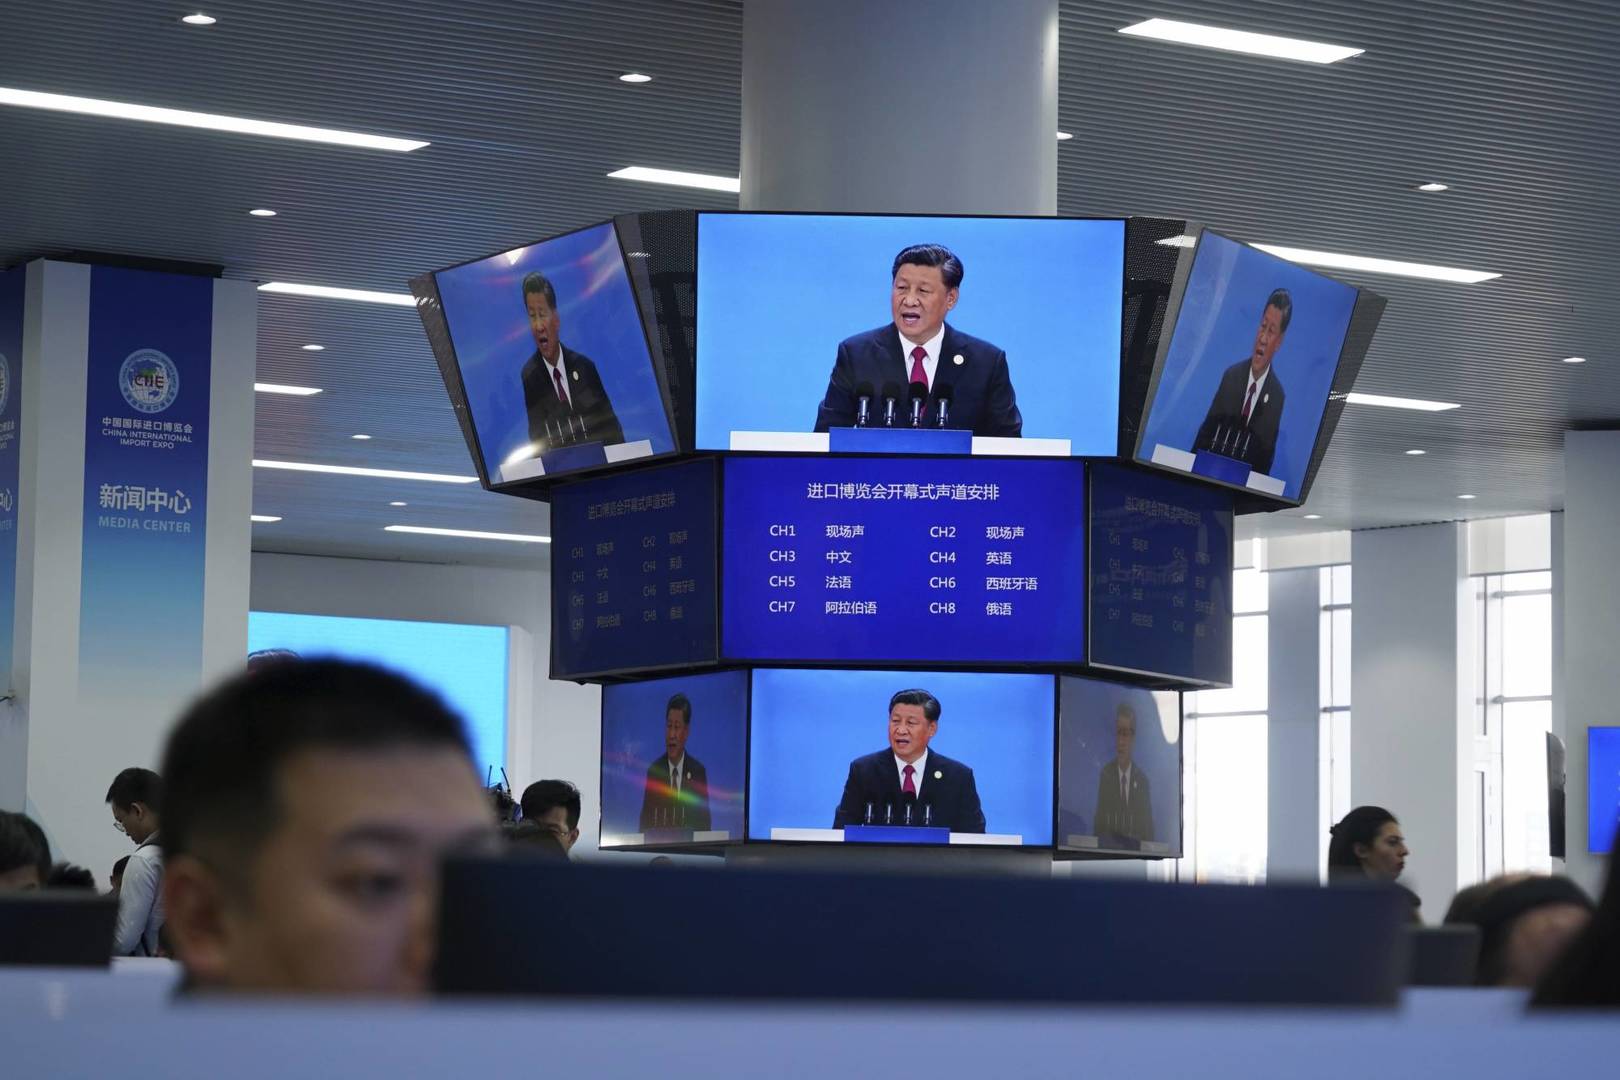 Chinese President Xi Jinping is seen on a live broadcast speaking at the media center during the opening of the China International Import Expo in Shanghai, Tuesday, Nov. 5, 2019. Xi promised Tuesday to open China wider to imports and foreign investment at the start of a high-profile trade fair meant to rebrand the country as a global customer and warned against trade protectionism. (AP Photo/Dake Kang)